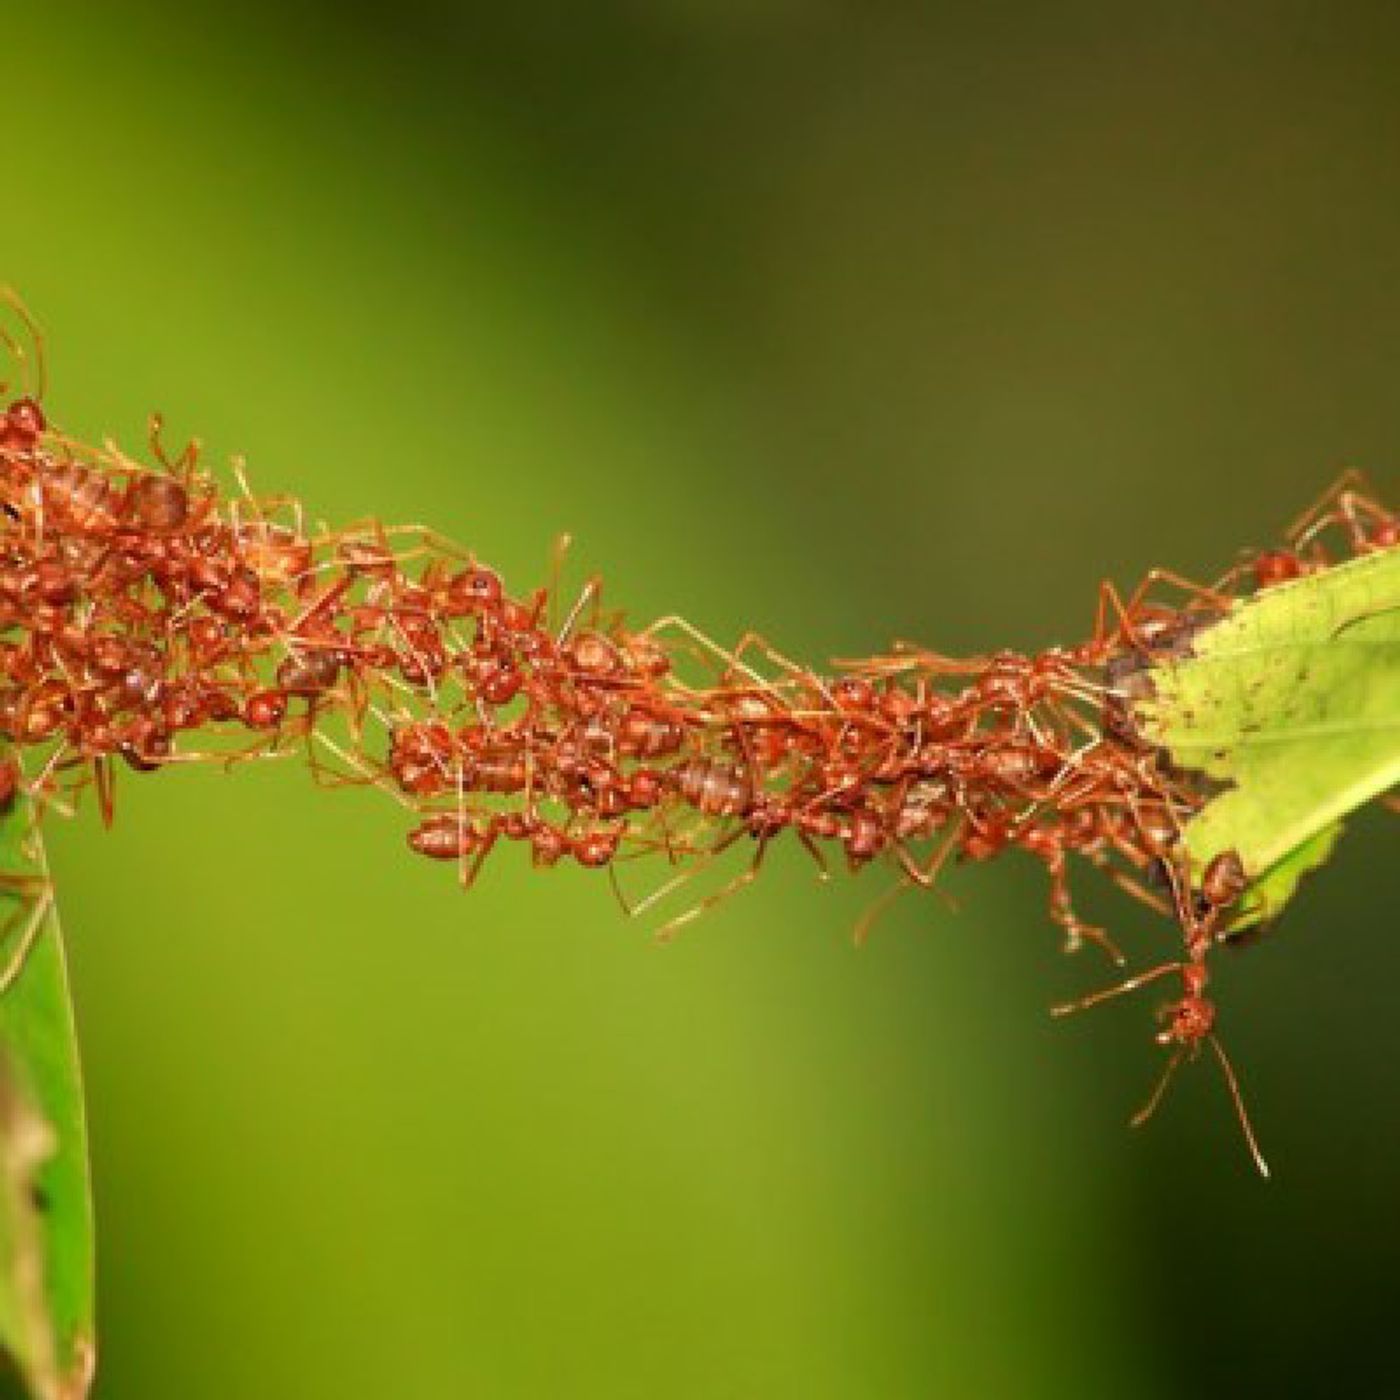 Why Ants Can Rule The World Pt. 1